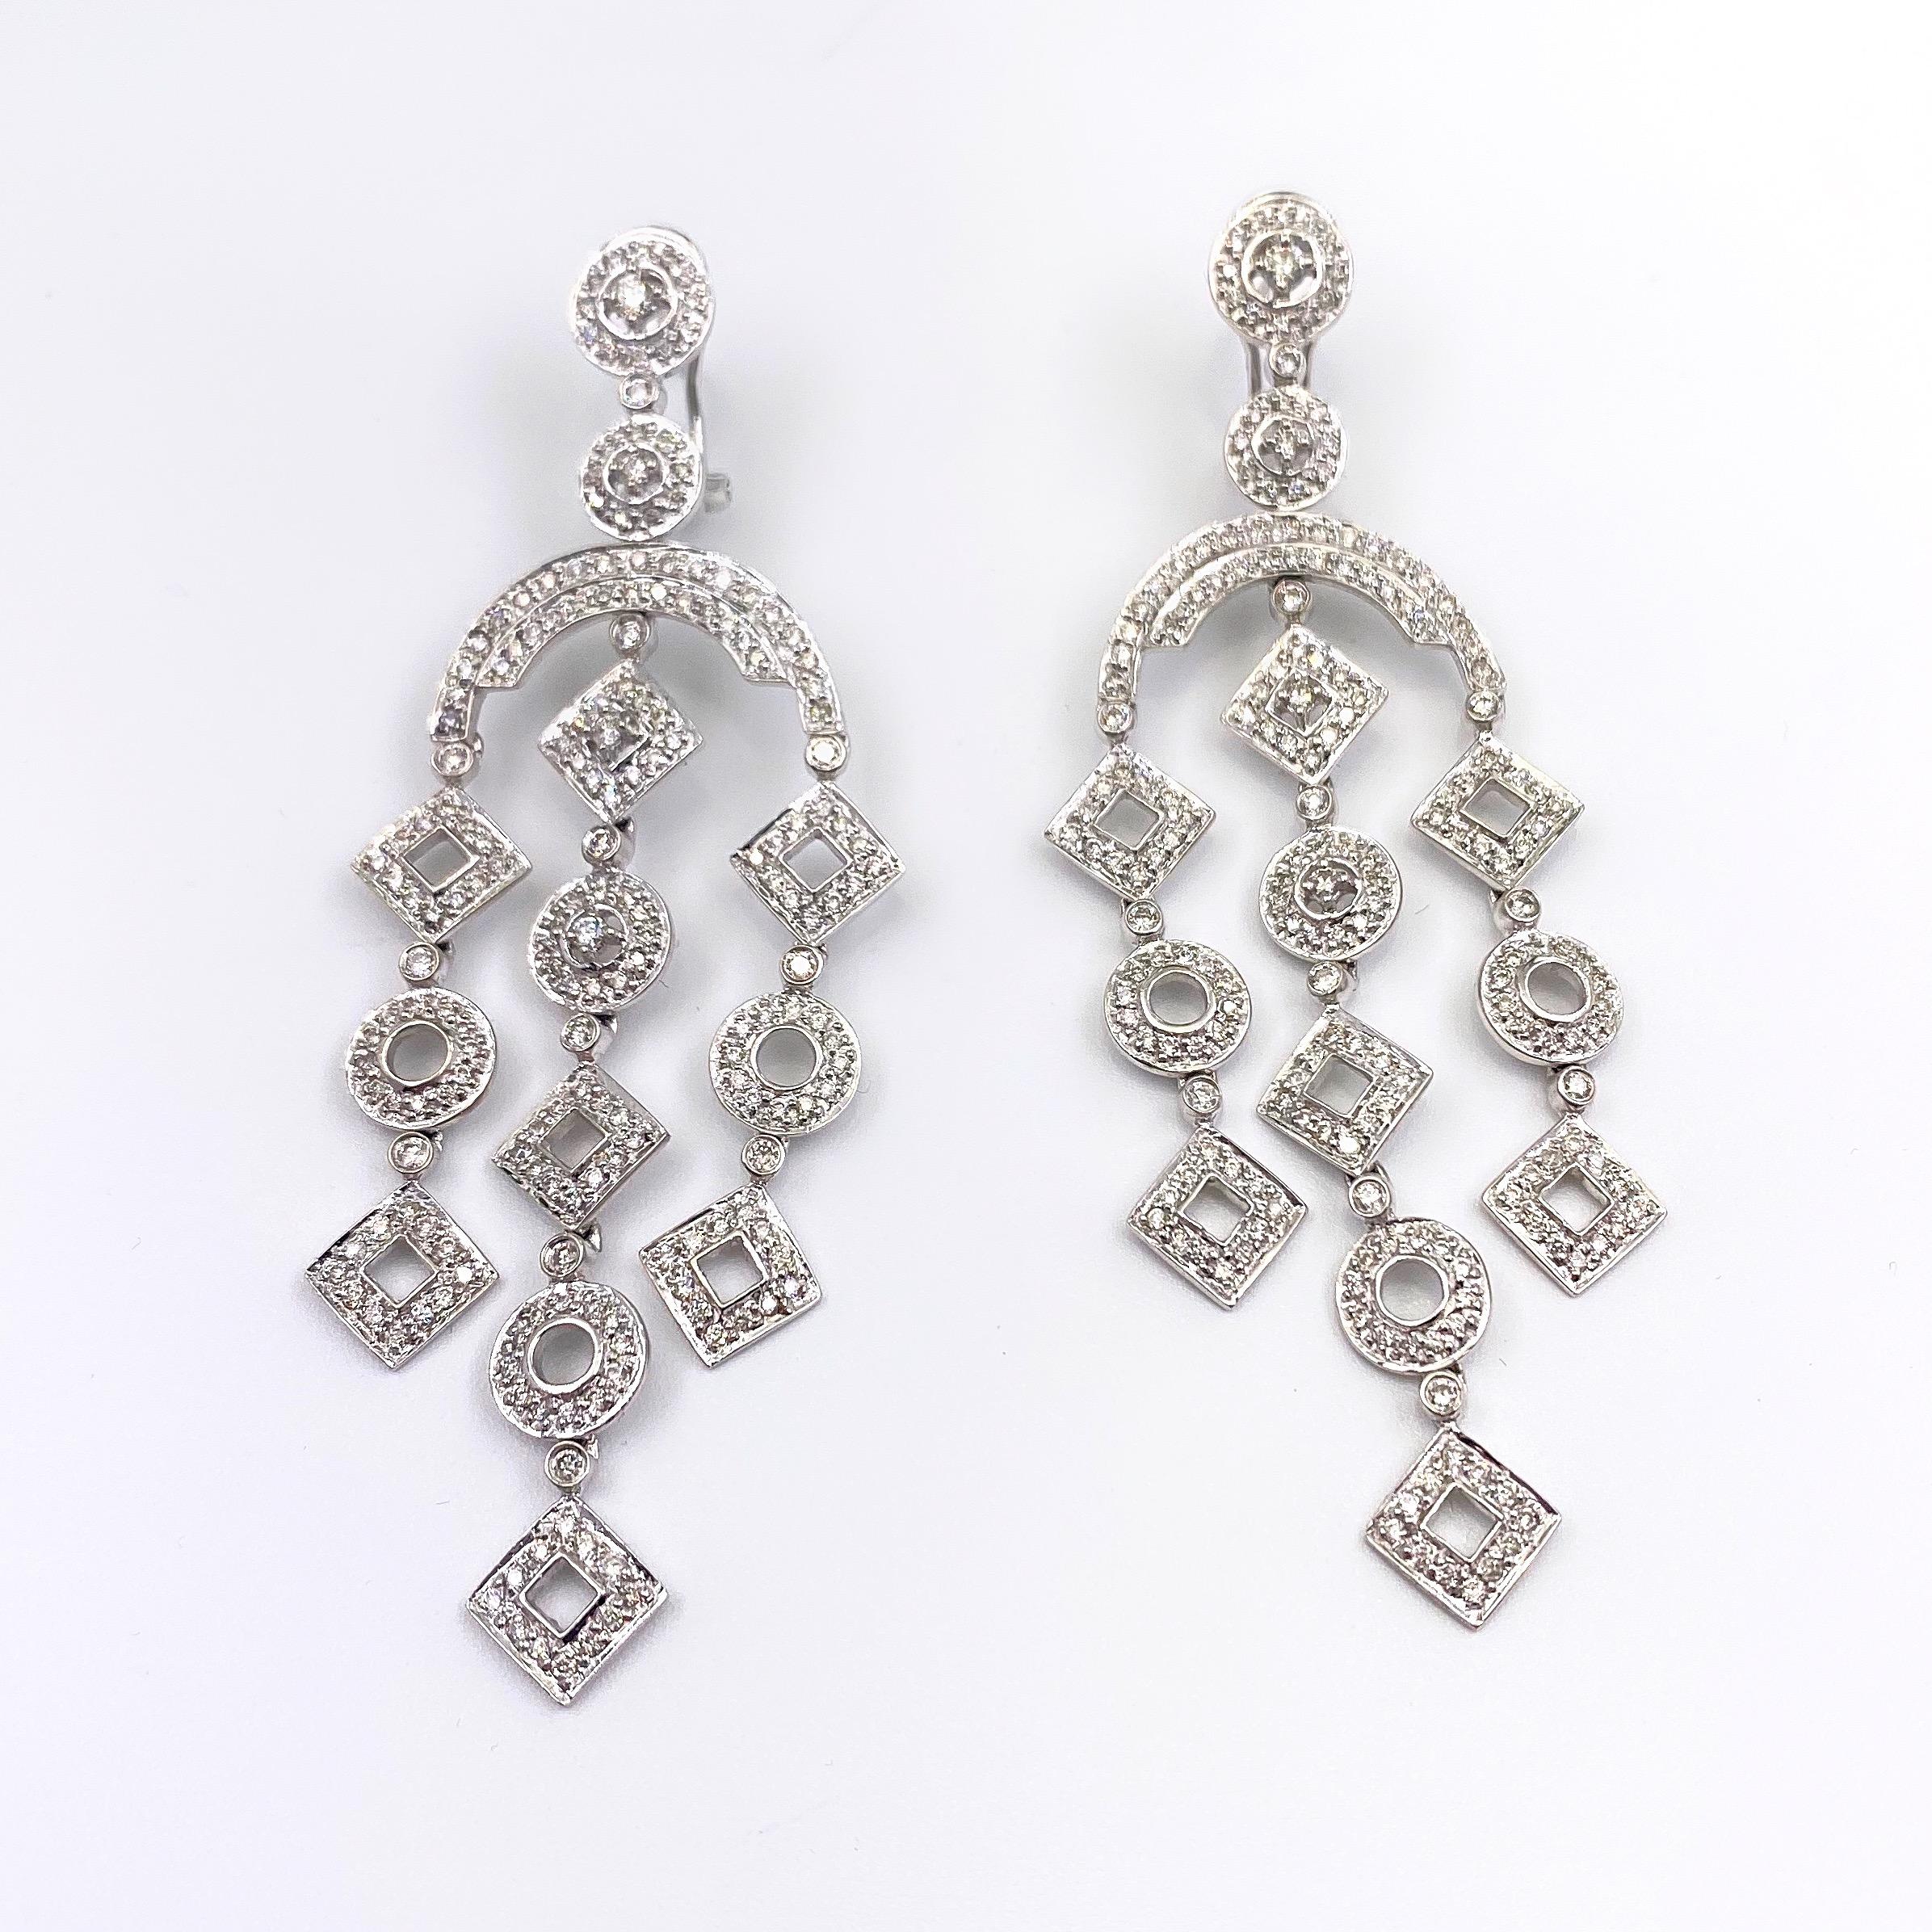 Diamond Geometric Chandelier Earrings 2 Carat Total Weight in 14 Karat Gold In Excellent Condition For Sale In San Diego, CA